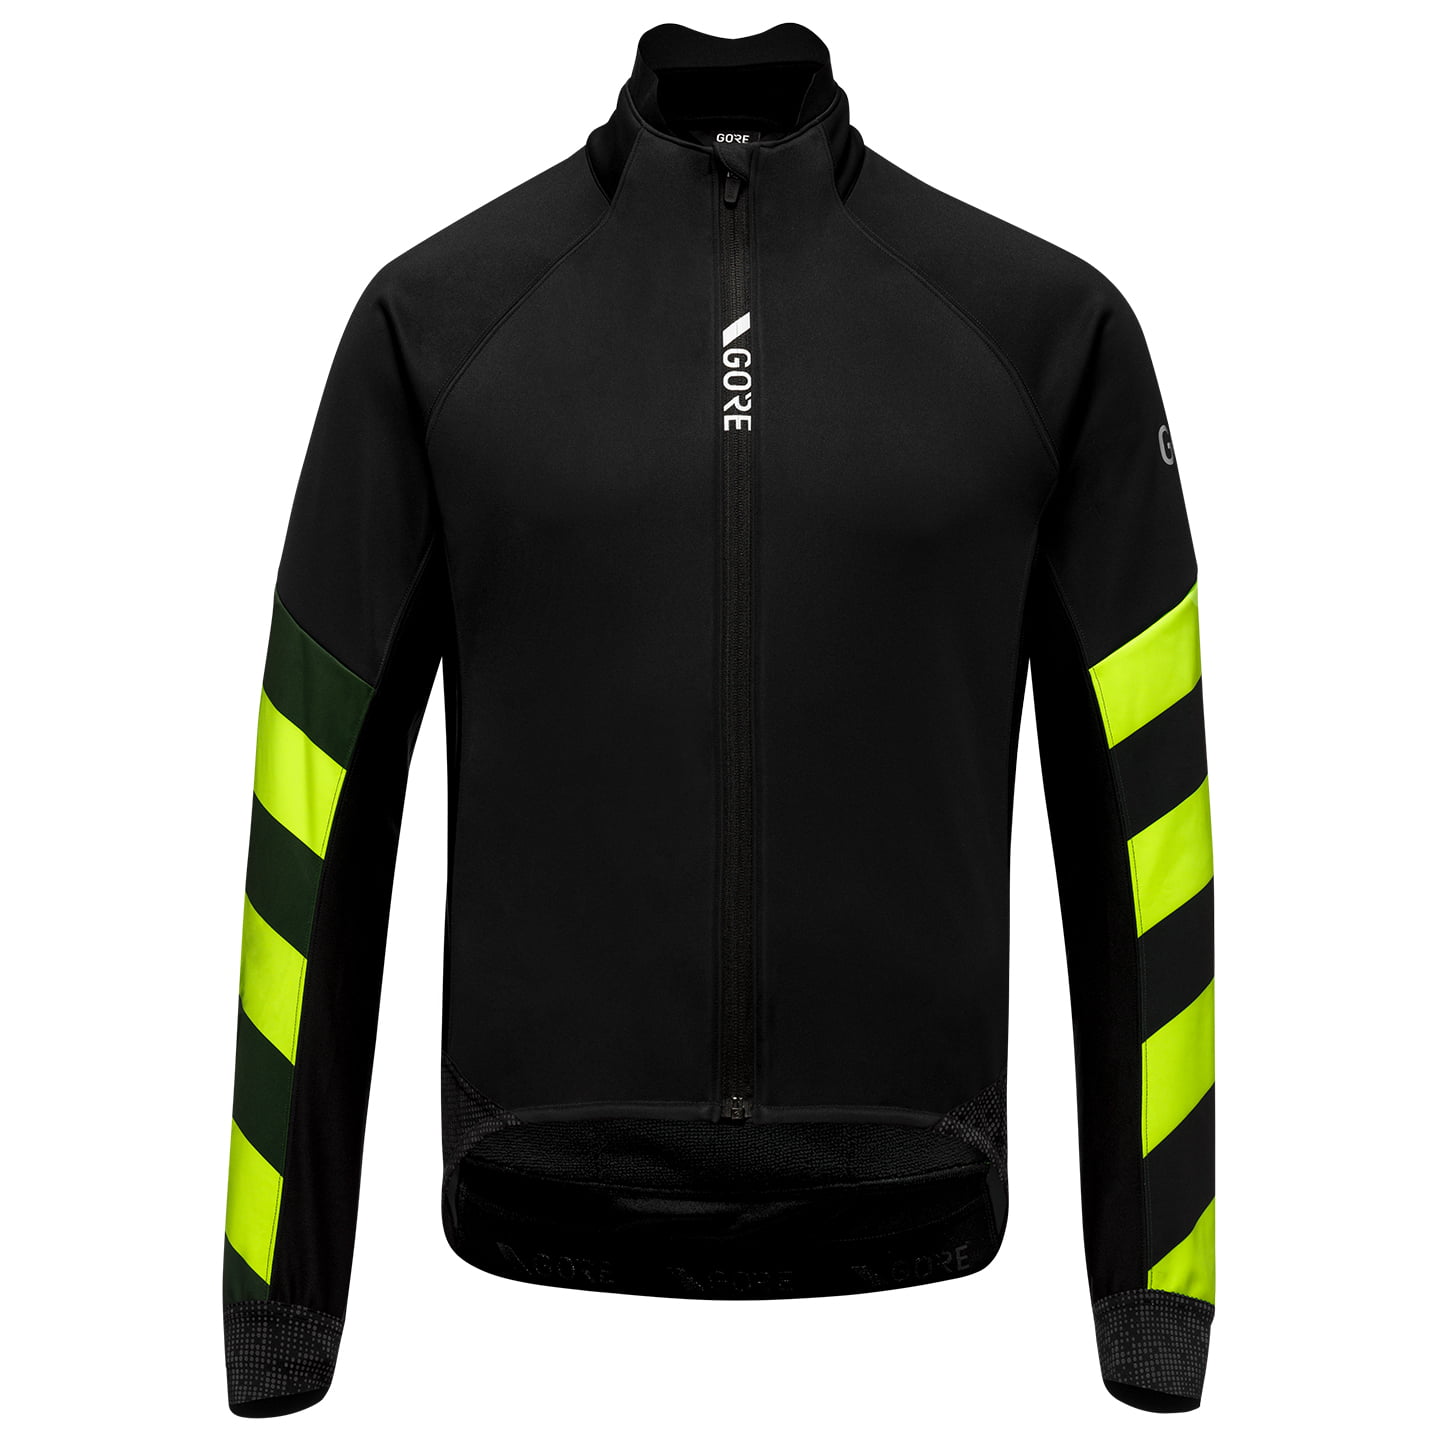 GORE WEAR Winter Jacket C5 Gore-Tex Infinium Signal Thermal Jacket, for men, size L, Winter jacket, Cycle clothing